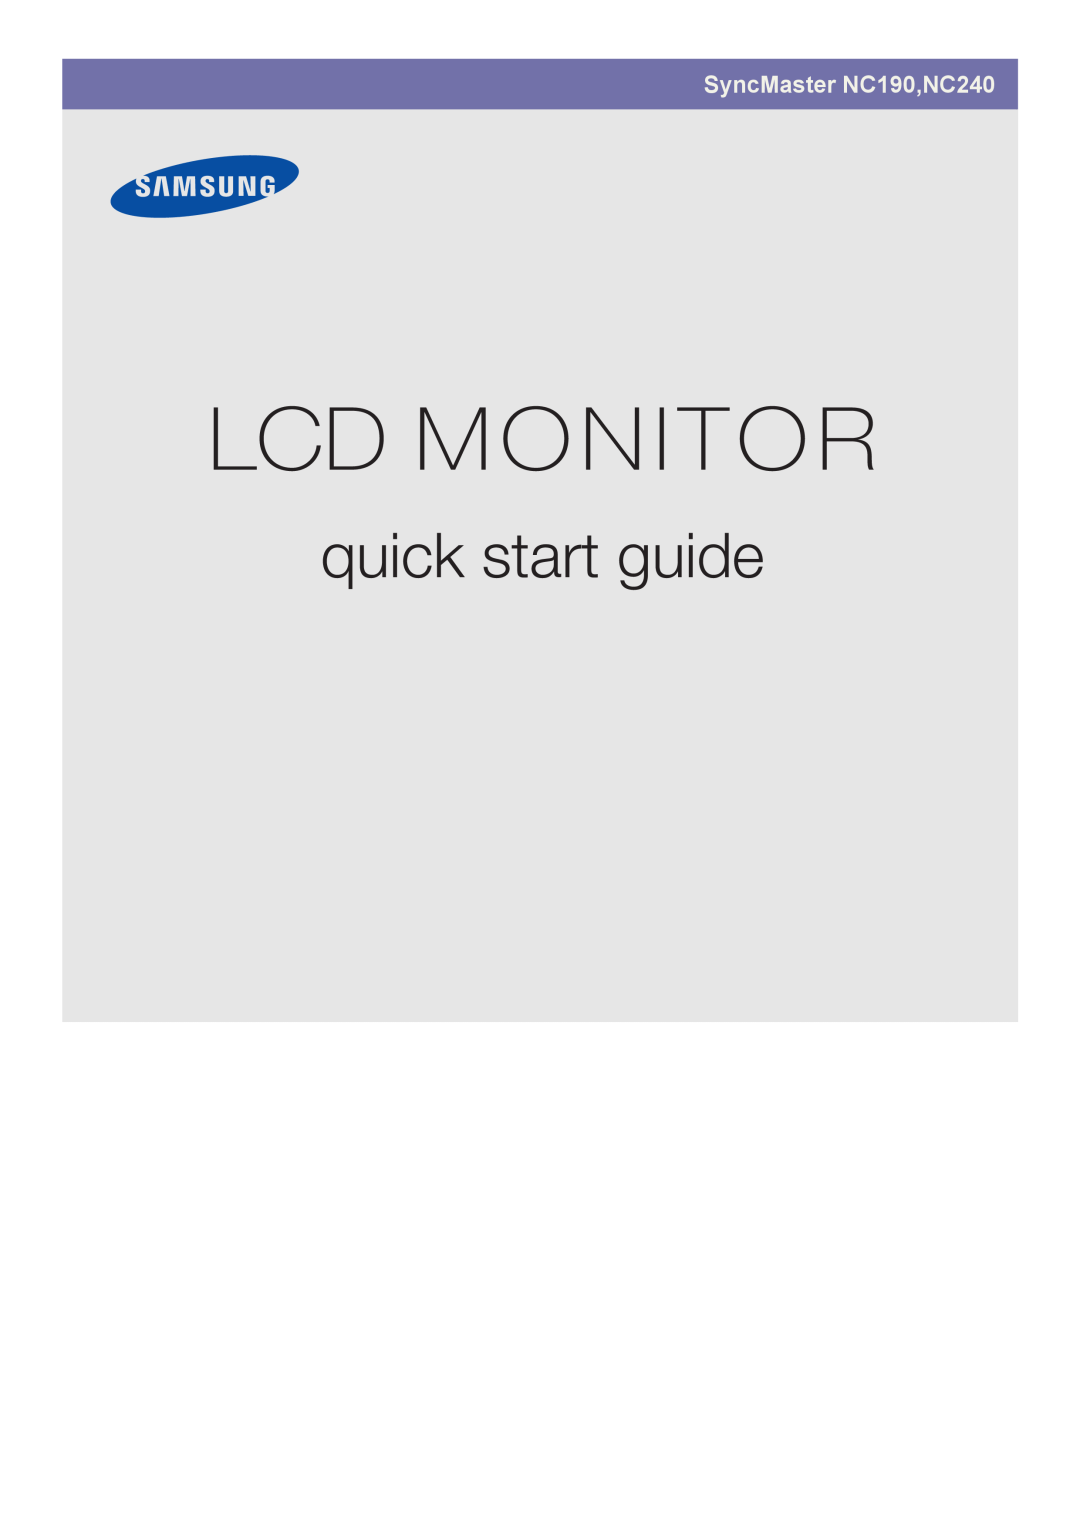 Samsung BN59-00954A_02 quick start Lcd Monitor, quick start guide, SyncMaster NC190,NC240 